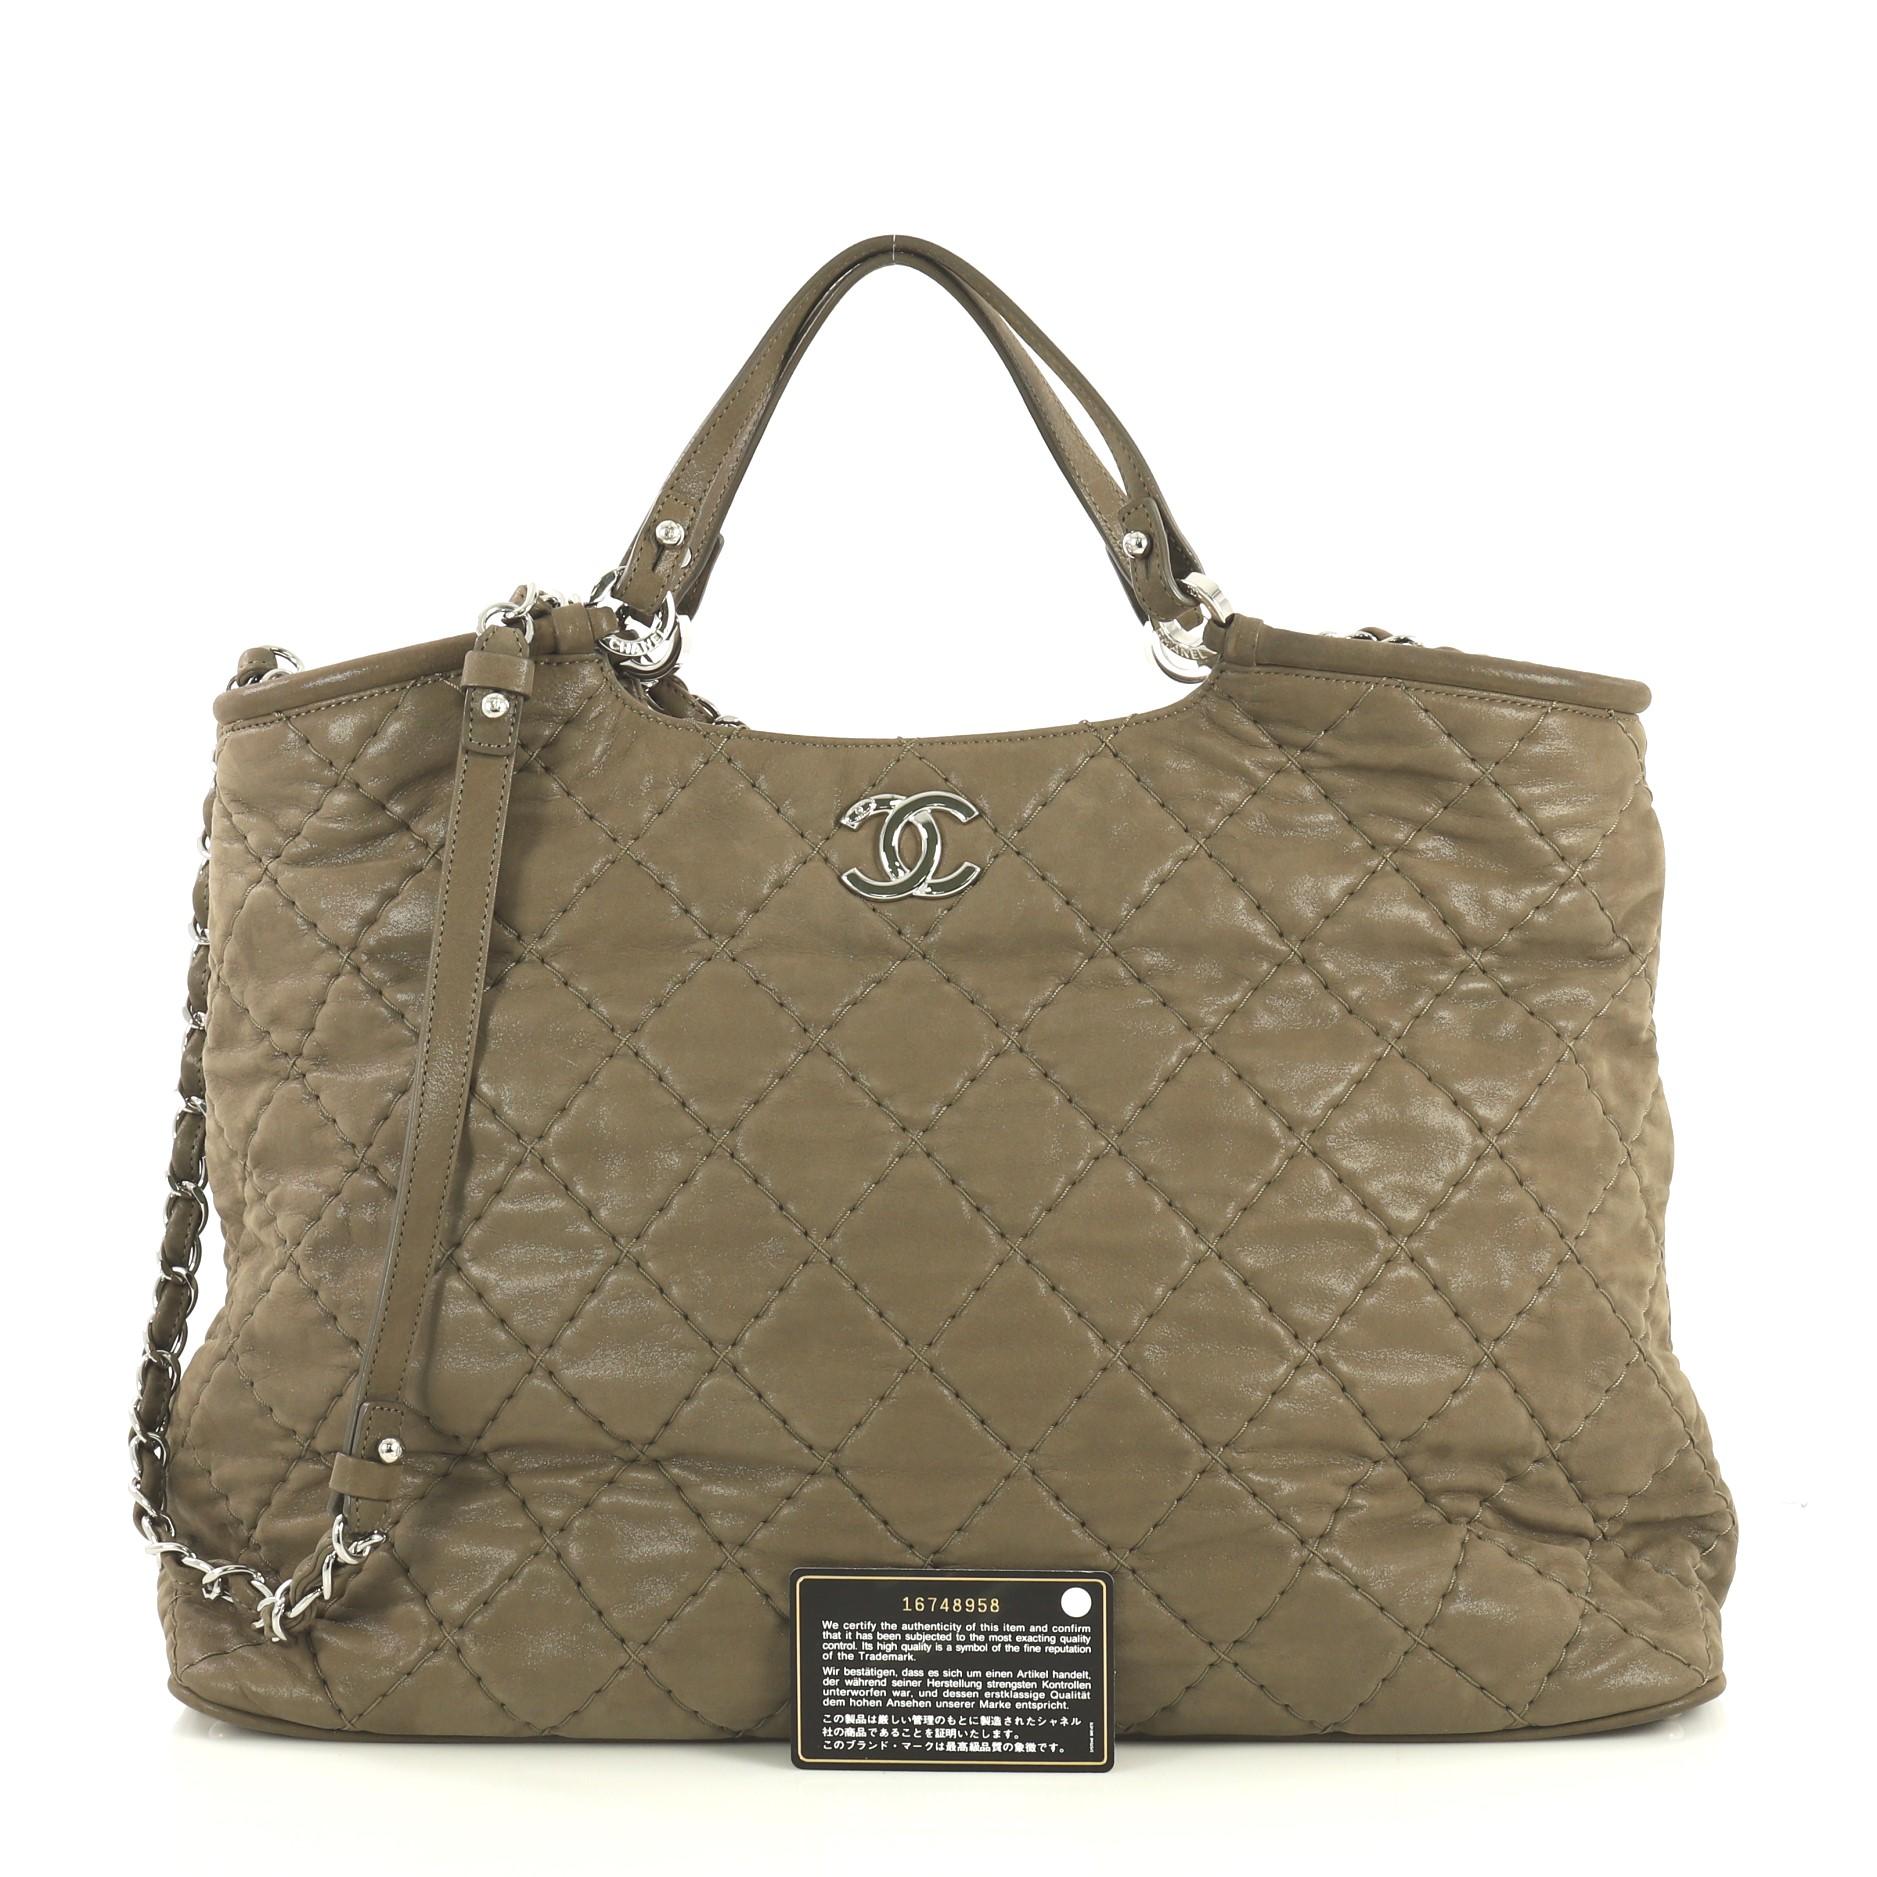 This Chanel CC Sea Hit Tote Quilted Iridescent Calfskin Large, crafted in neutral quilted iridescent calfskin leather, features dual slim leather handles, woven-in leather chain link straps with shoulder pads and silver-tone hardware. Its magnetic